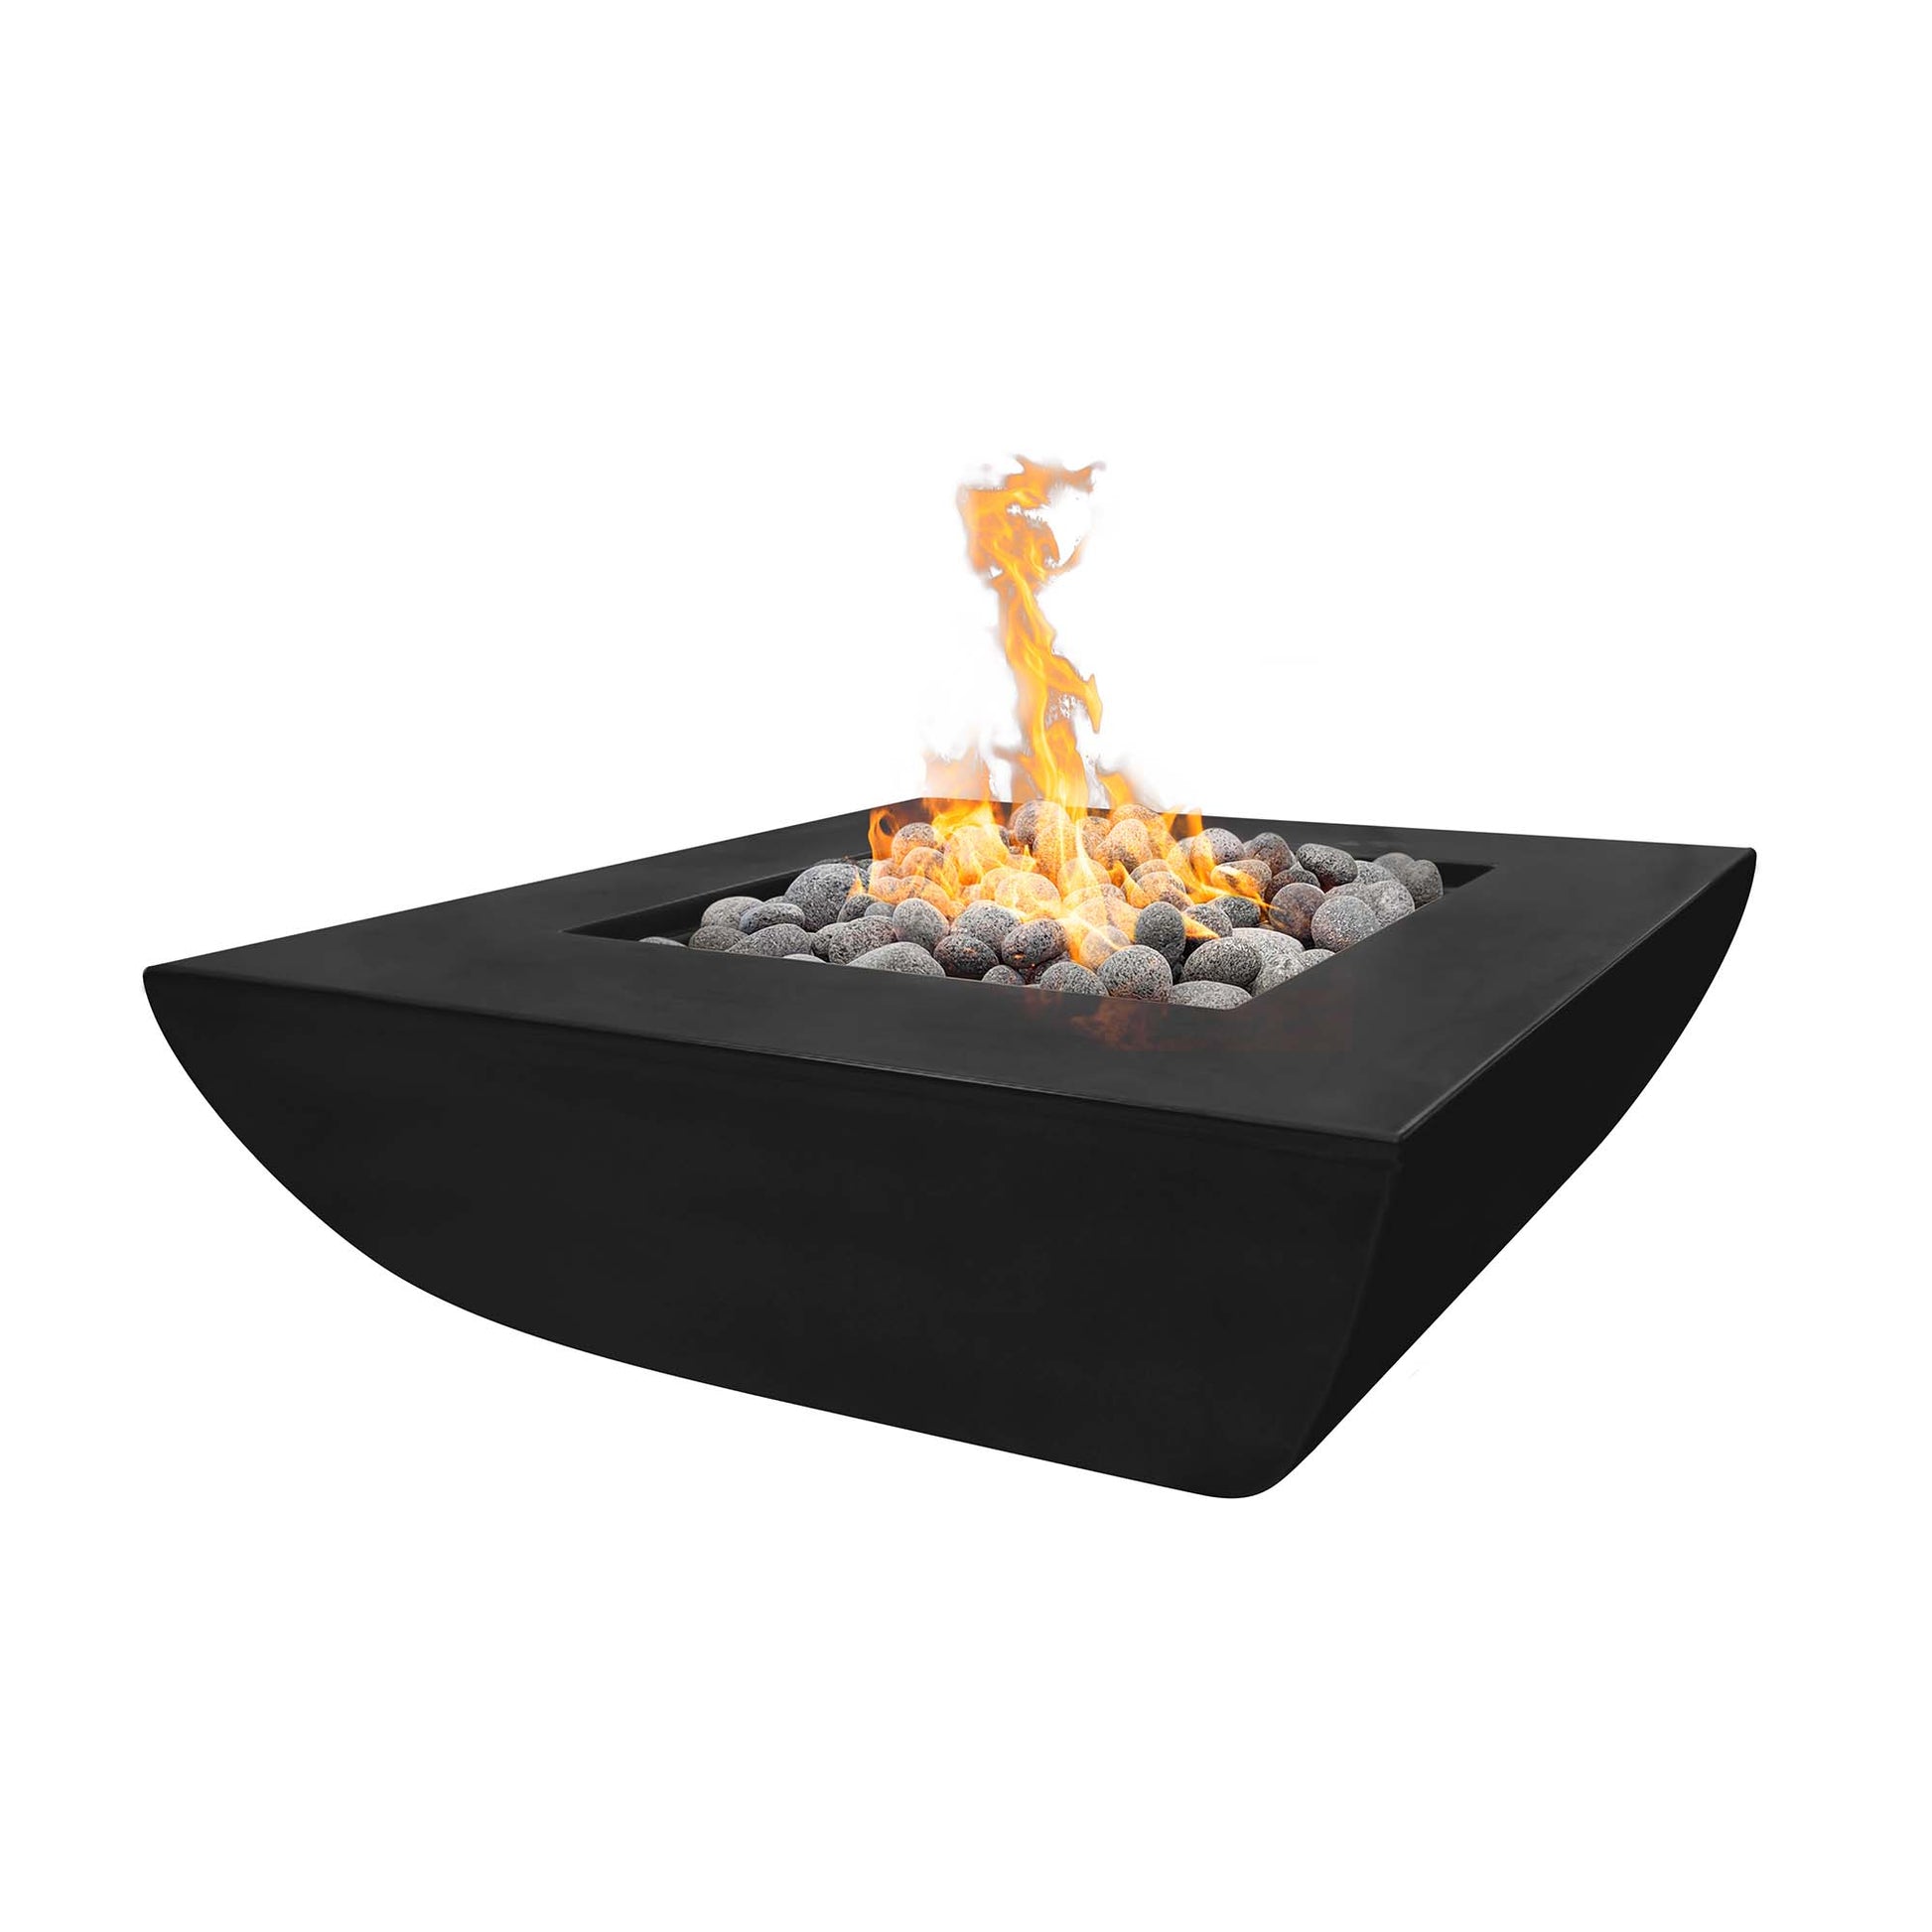 The Outdoor Plus Square Avalon 42" Metallic Pearl GFRC Concrete Natural Gas Fire Pit with Flame Sense with Spark Ignition